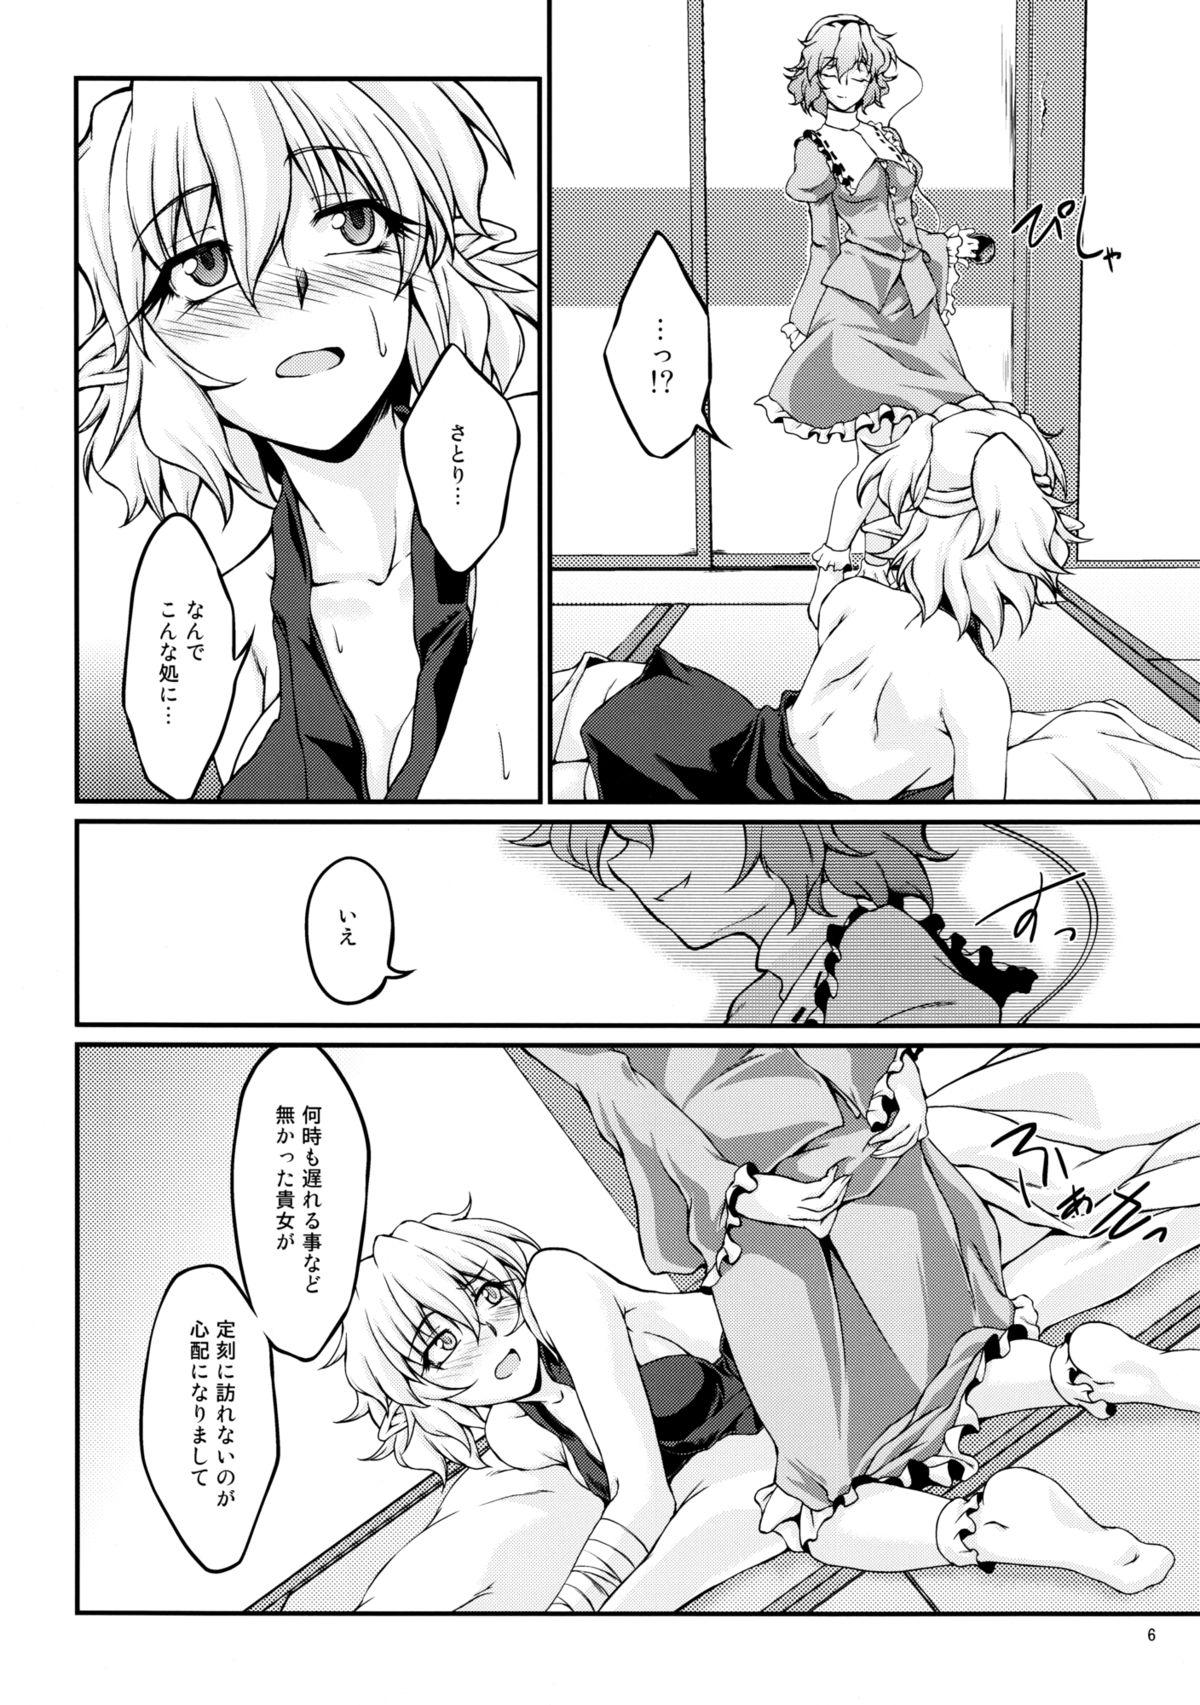 Sapphic Erotica Parsick! - Touhou project Spy - Page 5